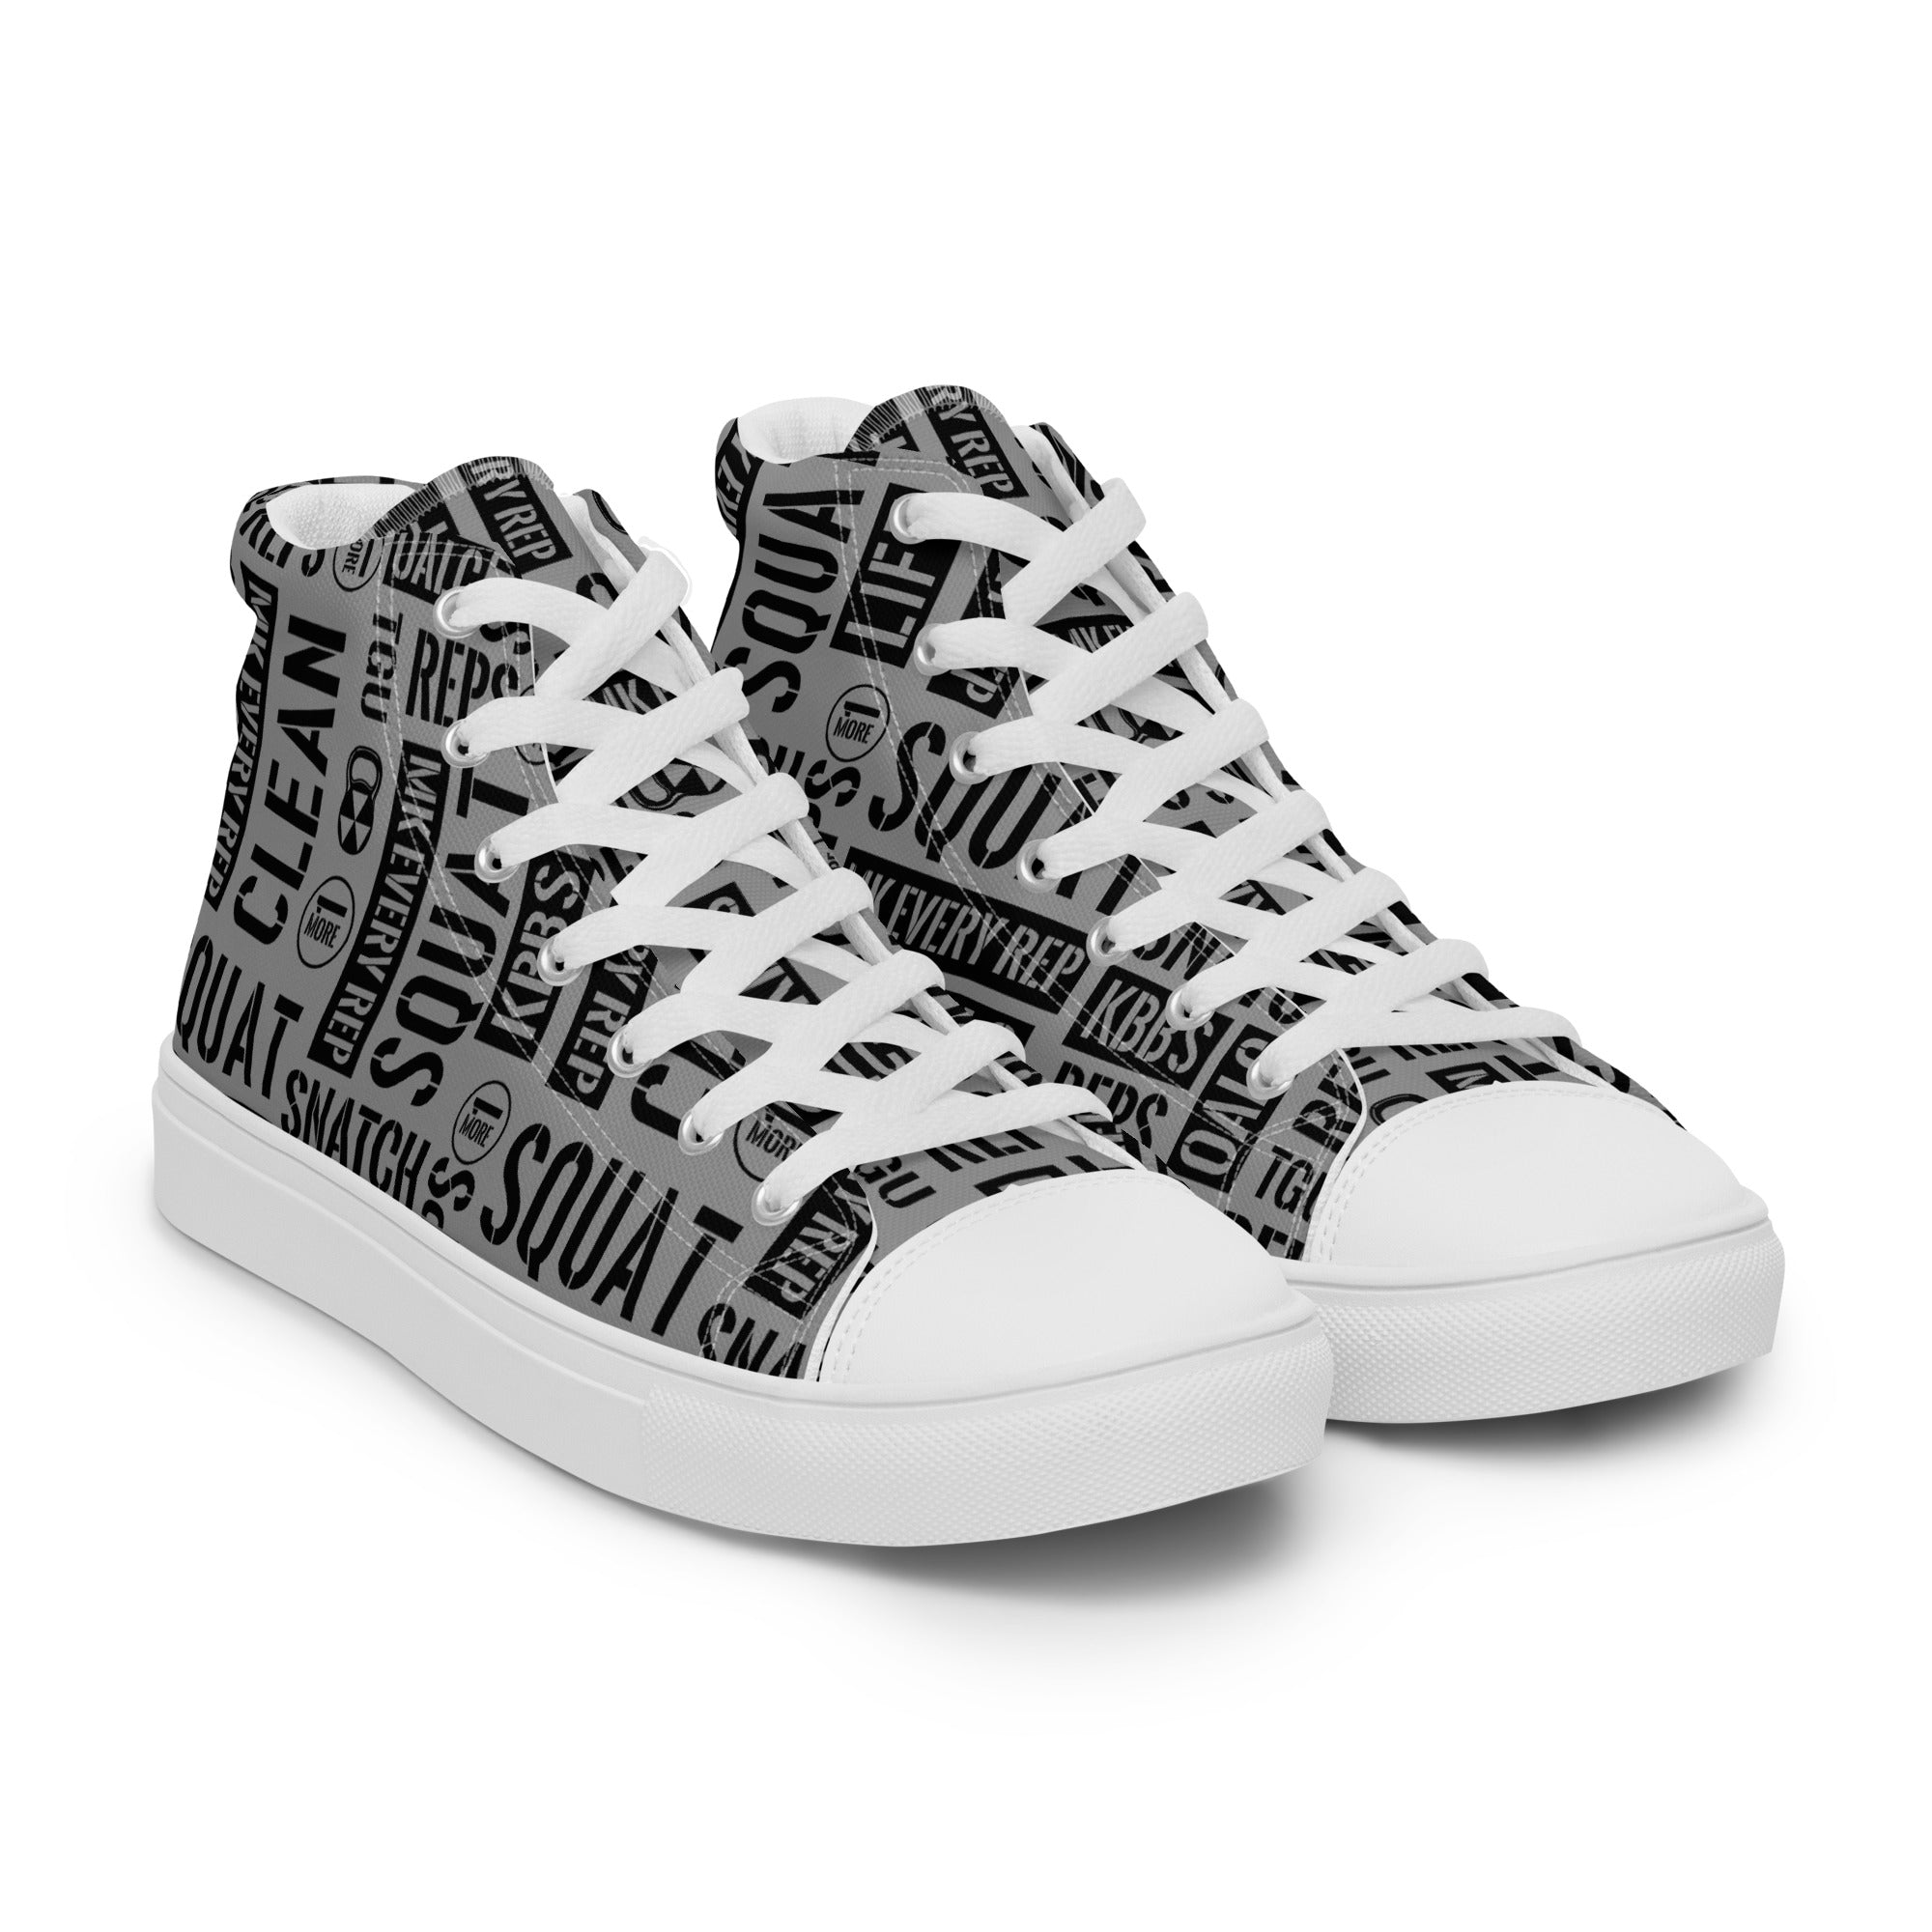 Men’s Charcoal Acronyms White High Tops Canvas Shoes